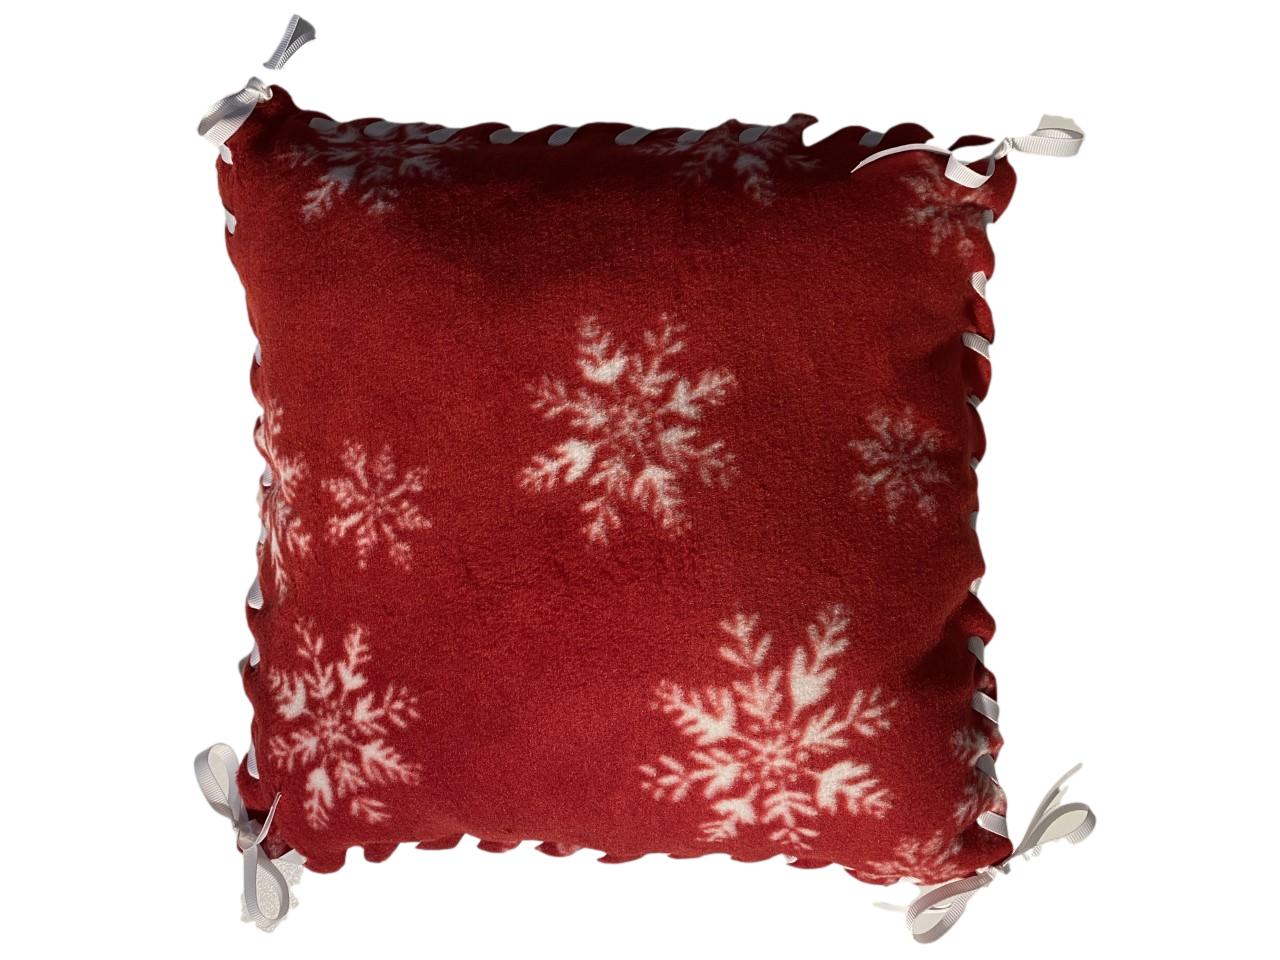 13 inch fleece pillow - red with white snowflakes and white ribbon